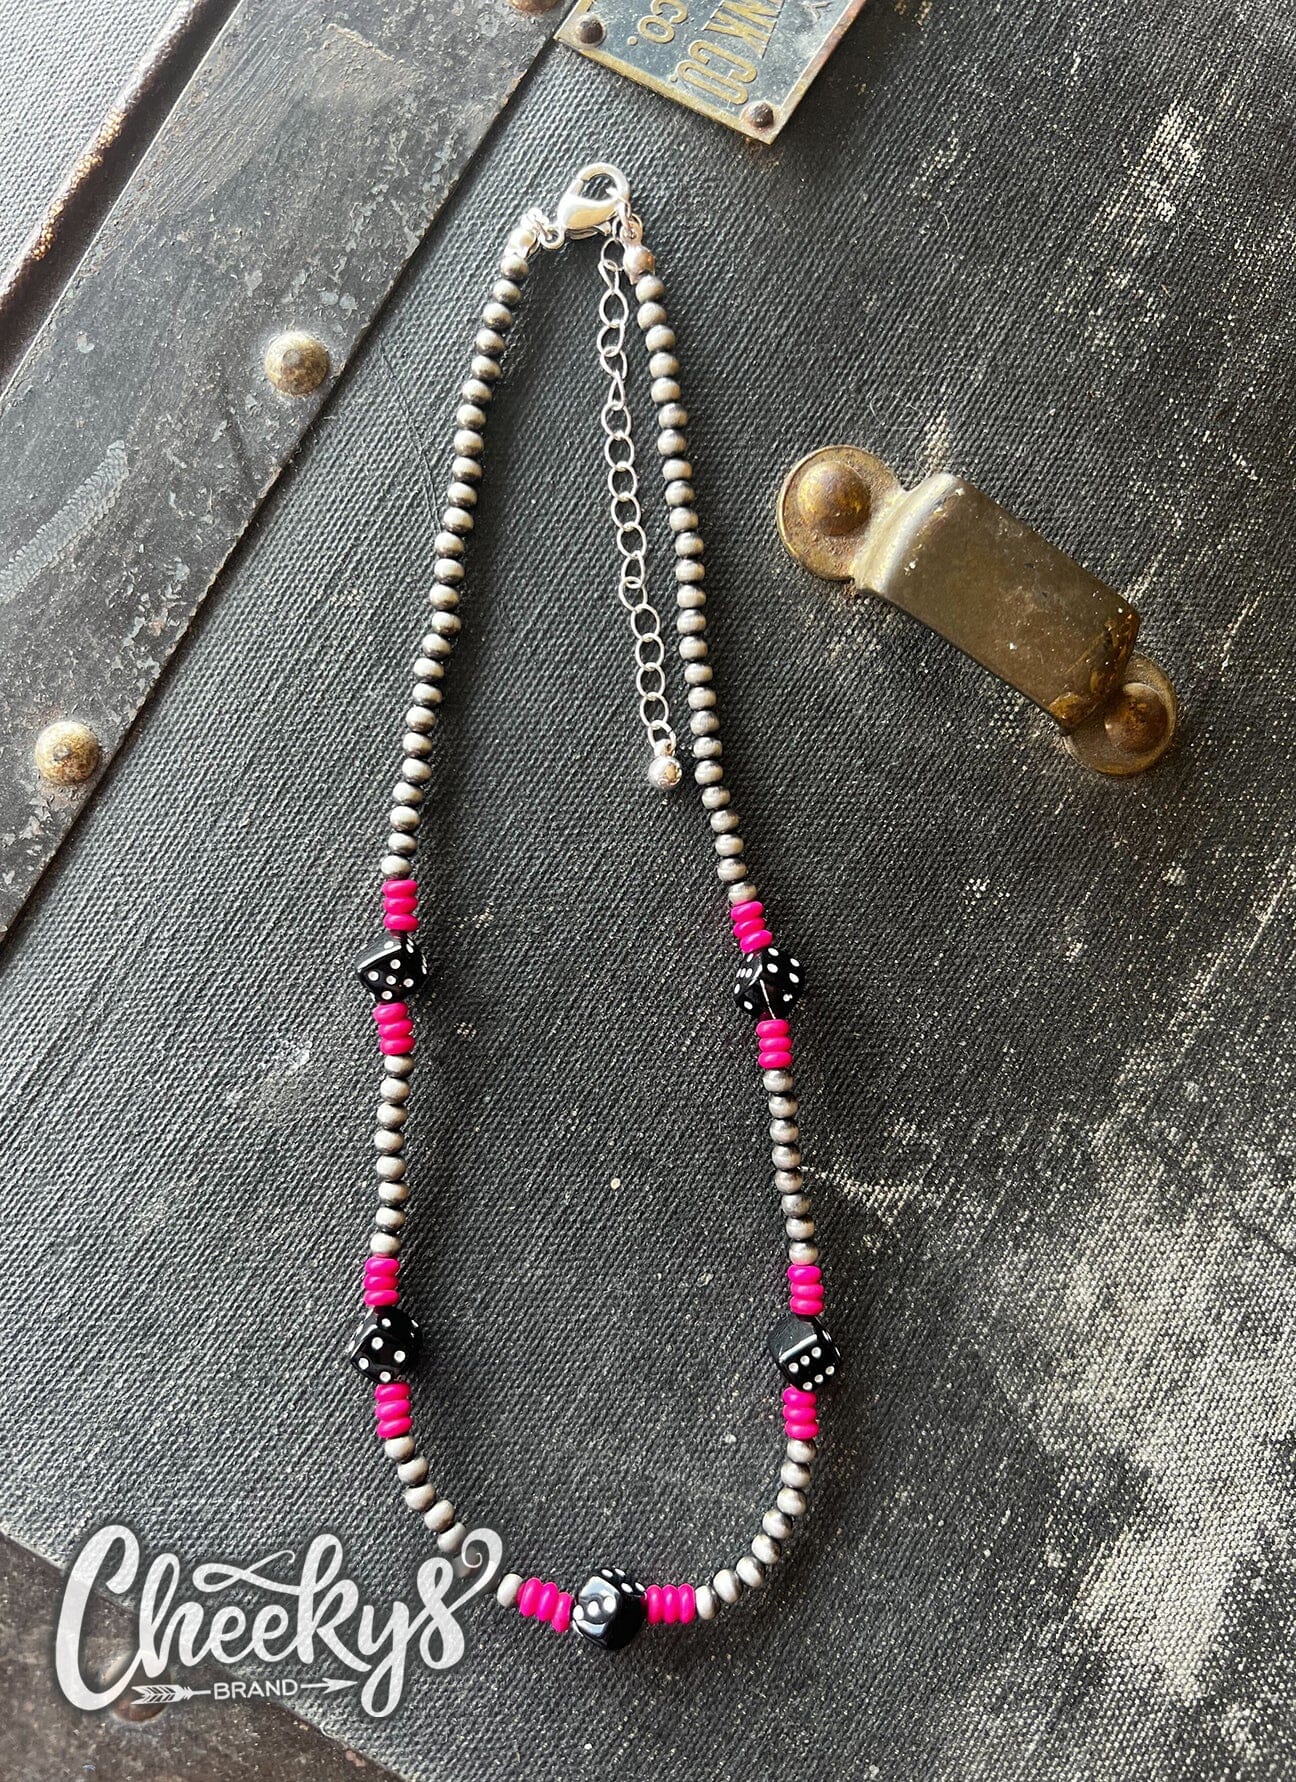 Roll The Dice Pink Color Necklace Cheekys Brand 